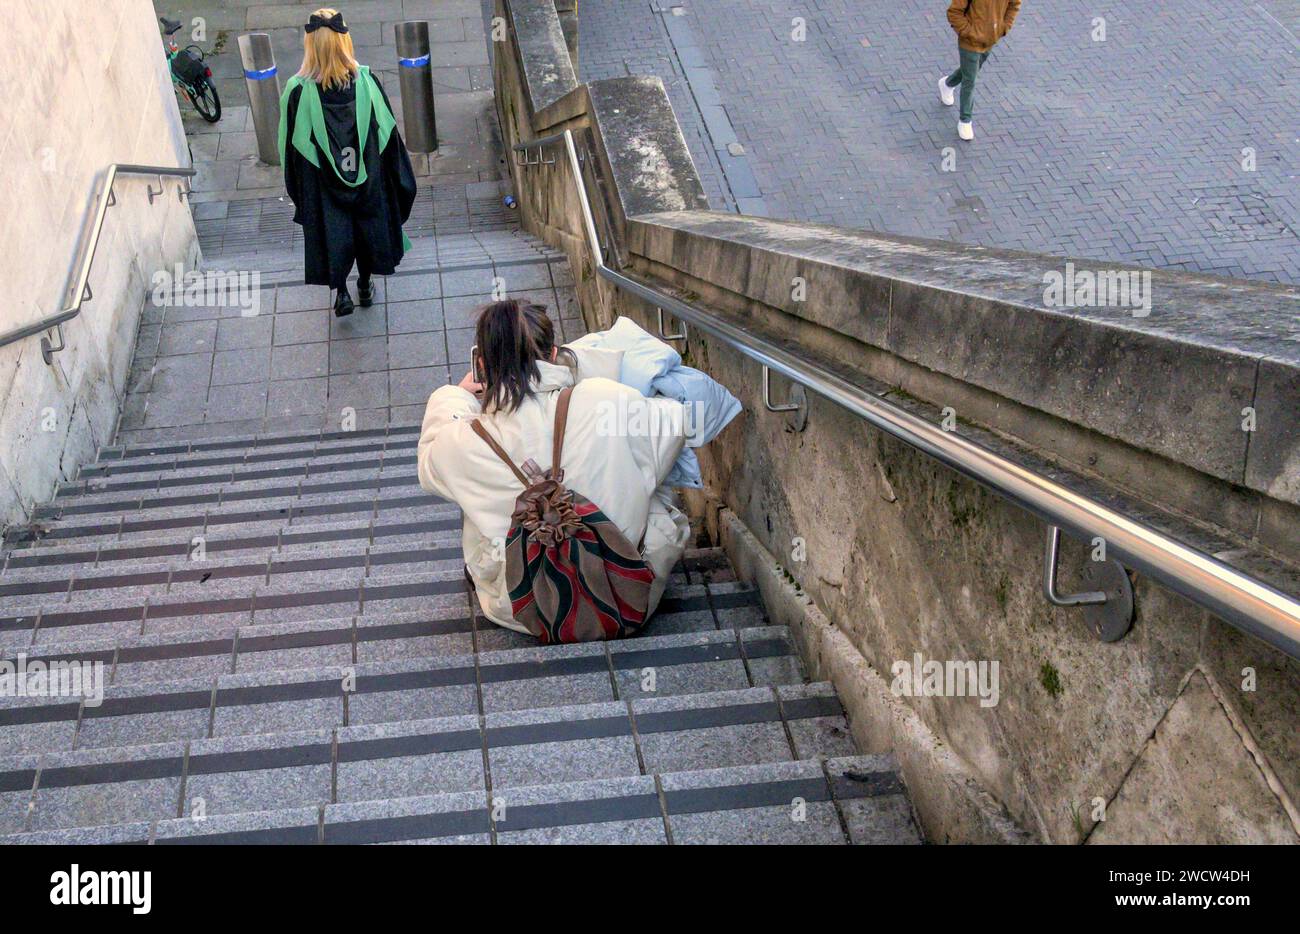 London, UK. People on steps on the South Bank. Oriental girl in graduation robe and another sitting on a step Stock Photo